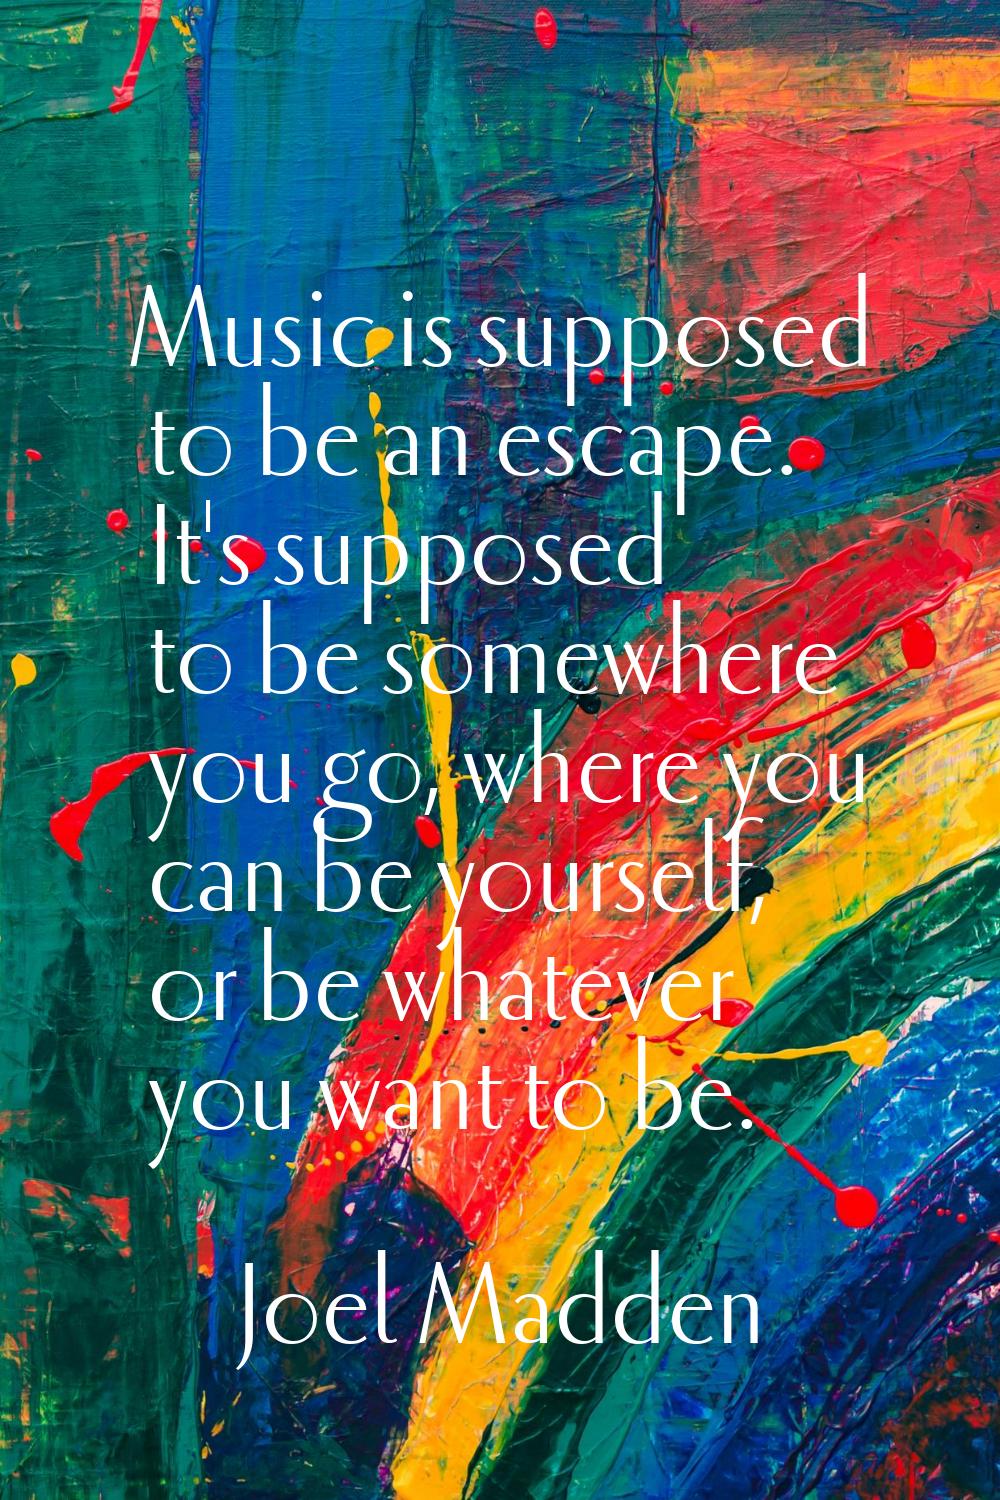 Music is supposed to be an escape. It's supposed to be somewhere you go, where you can be yourself,